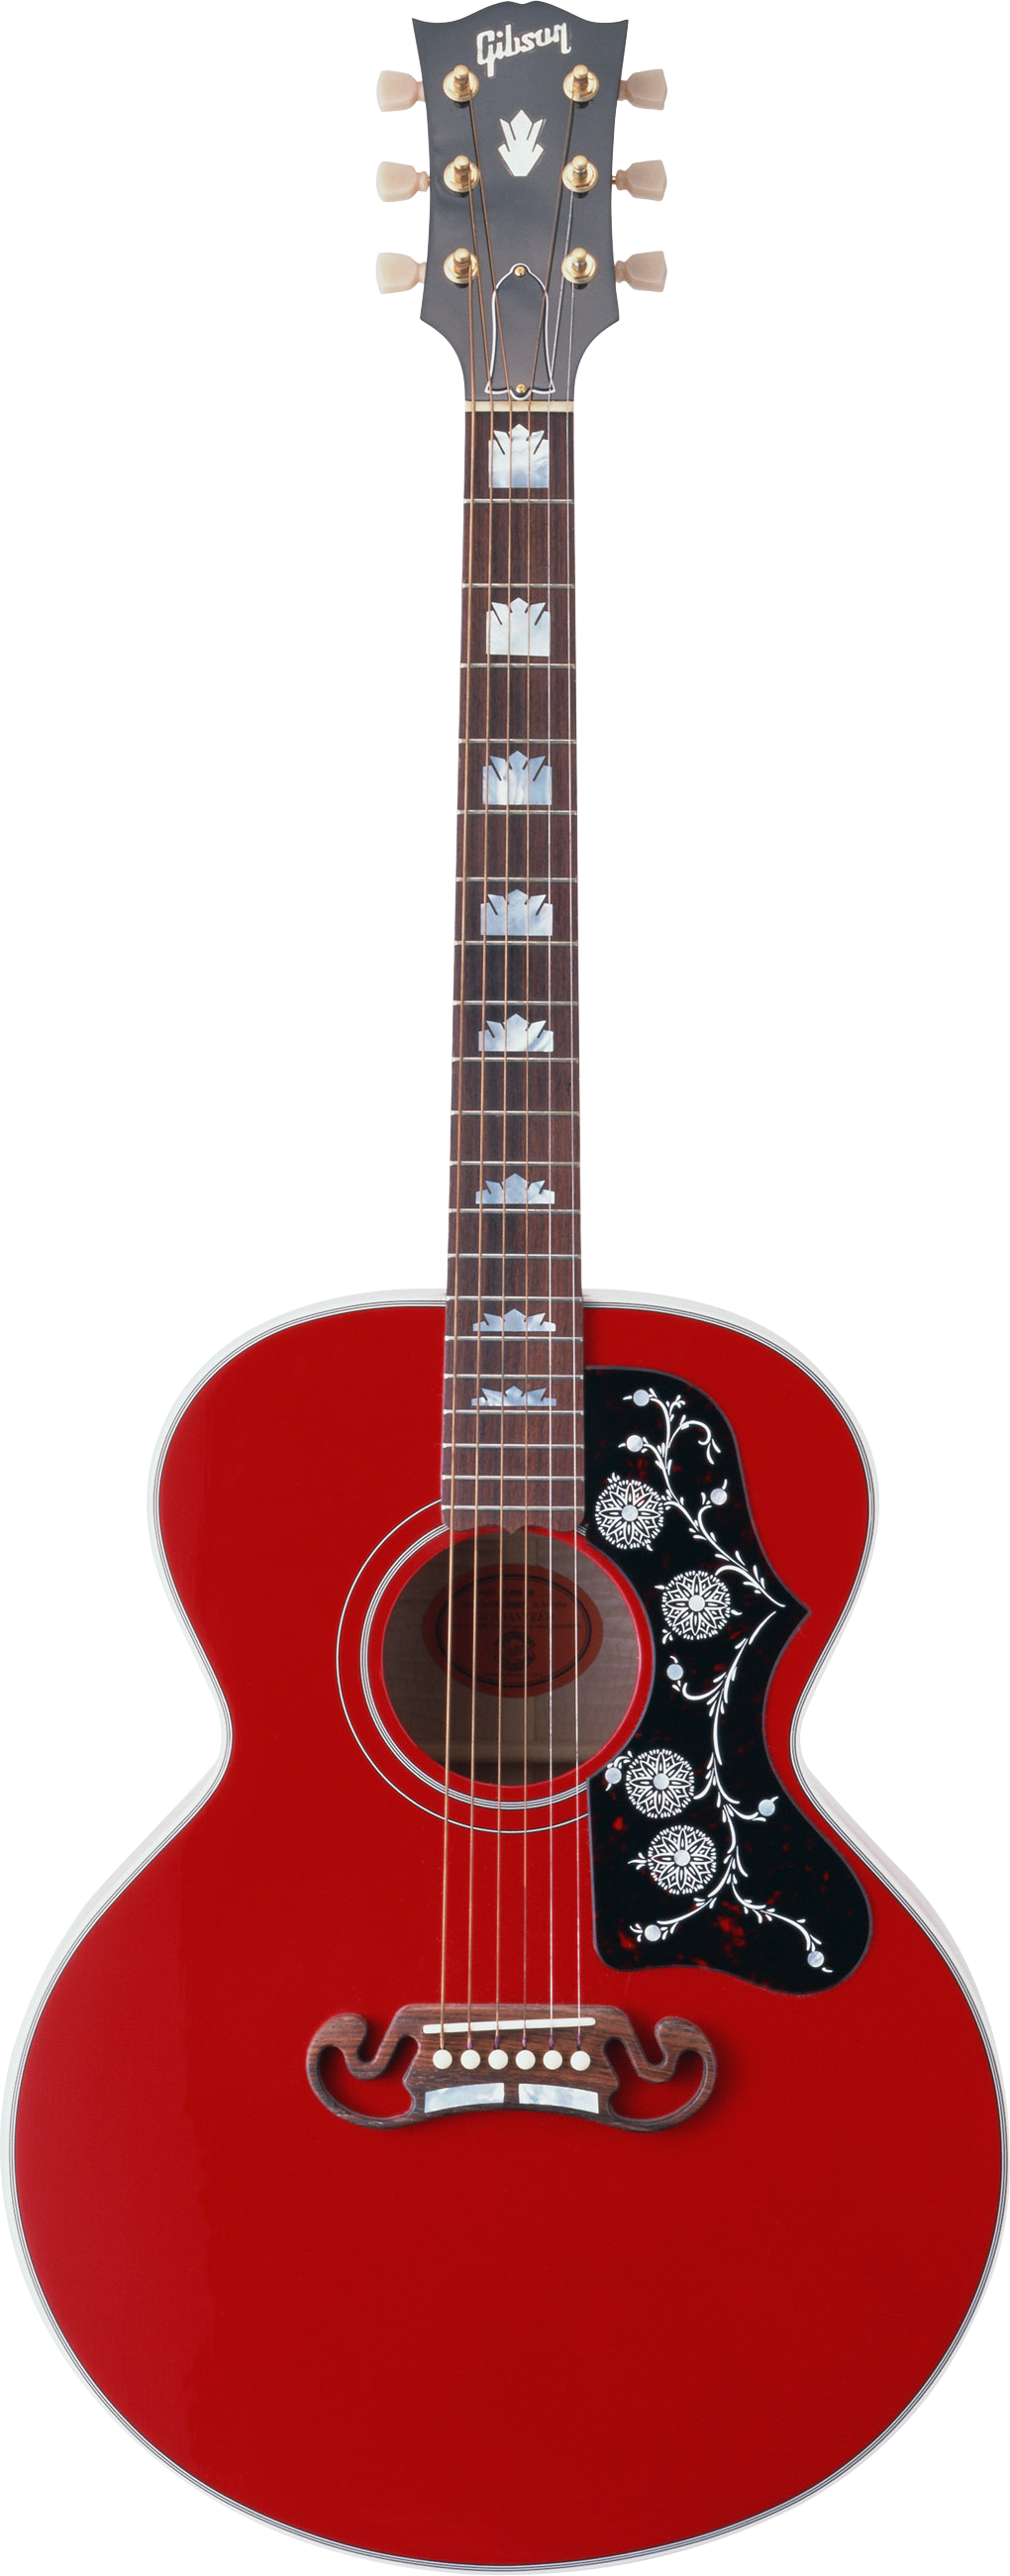 Guitar Acoustic Computer File Free Photo PNG Clipart